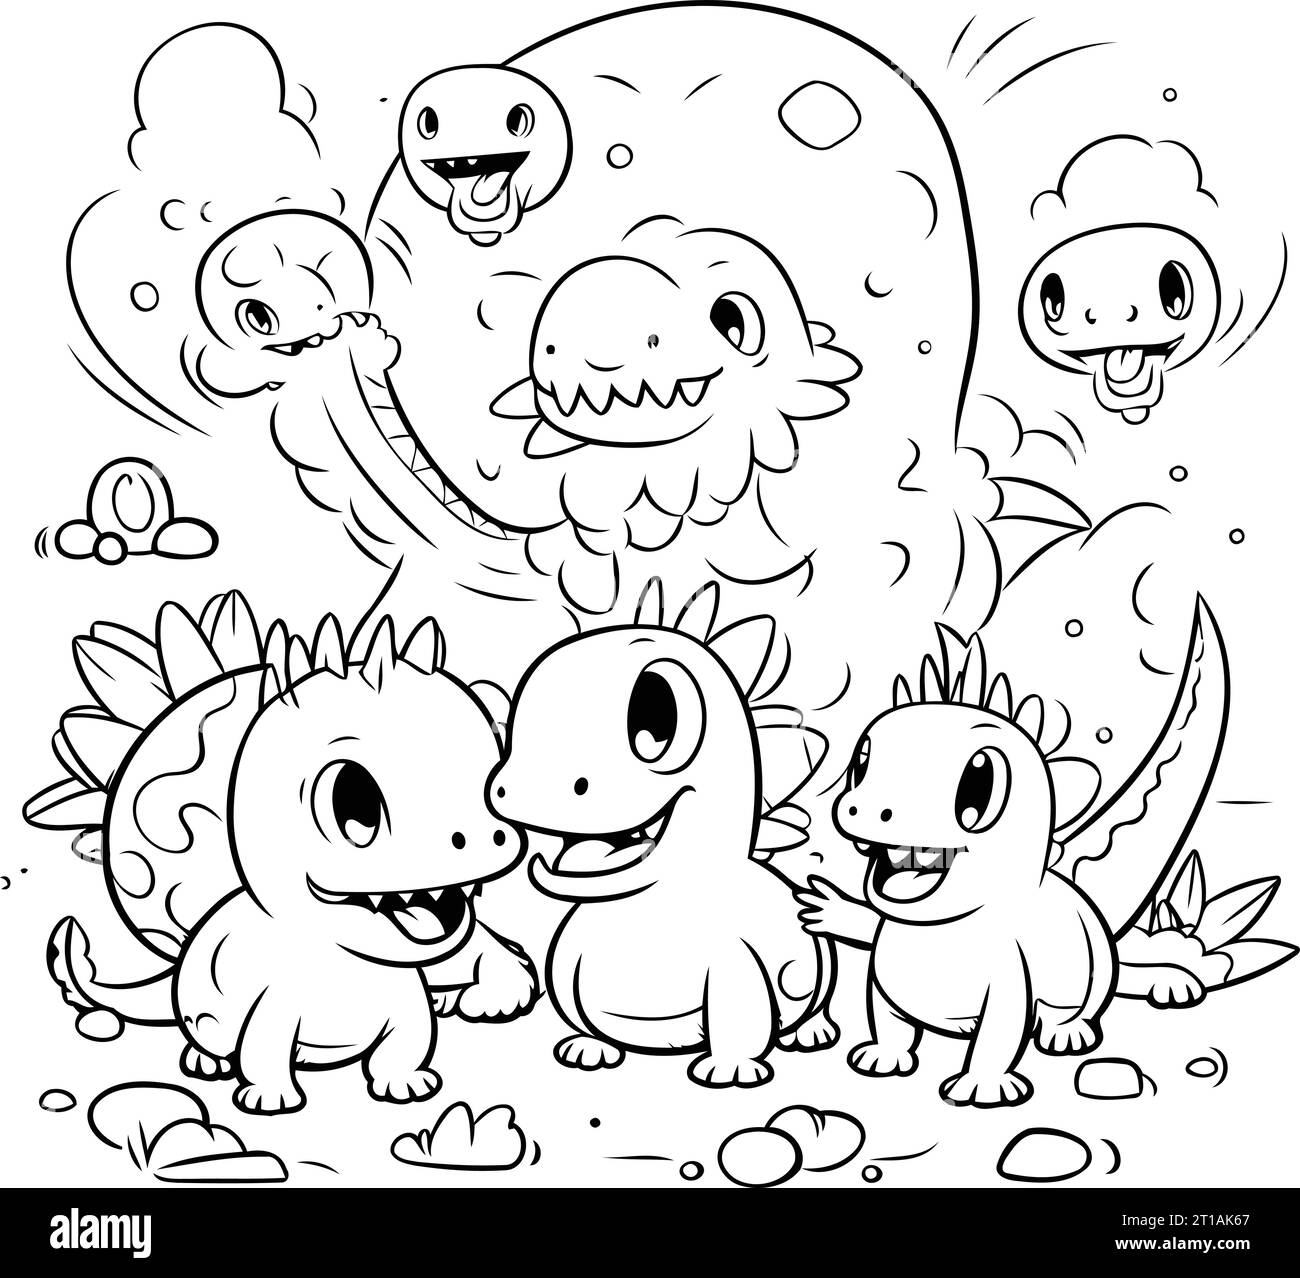 Black and White Cartoon Illustration of Funny Dinosaur Animal Characters Group Coloring Book Stock Vector